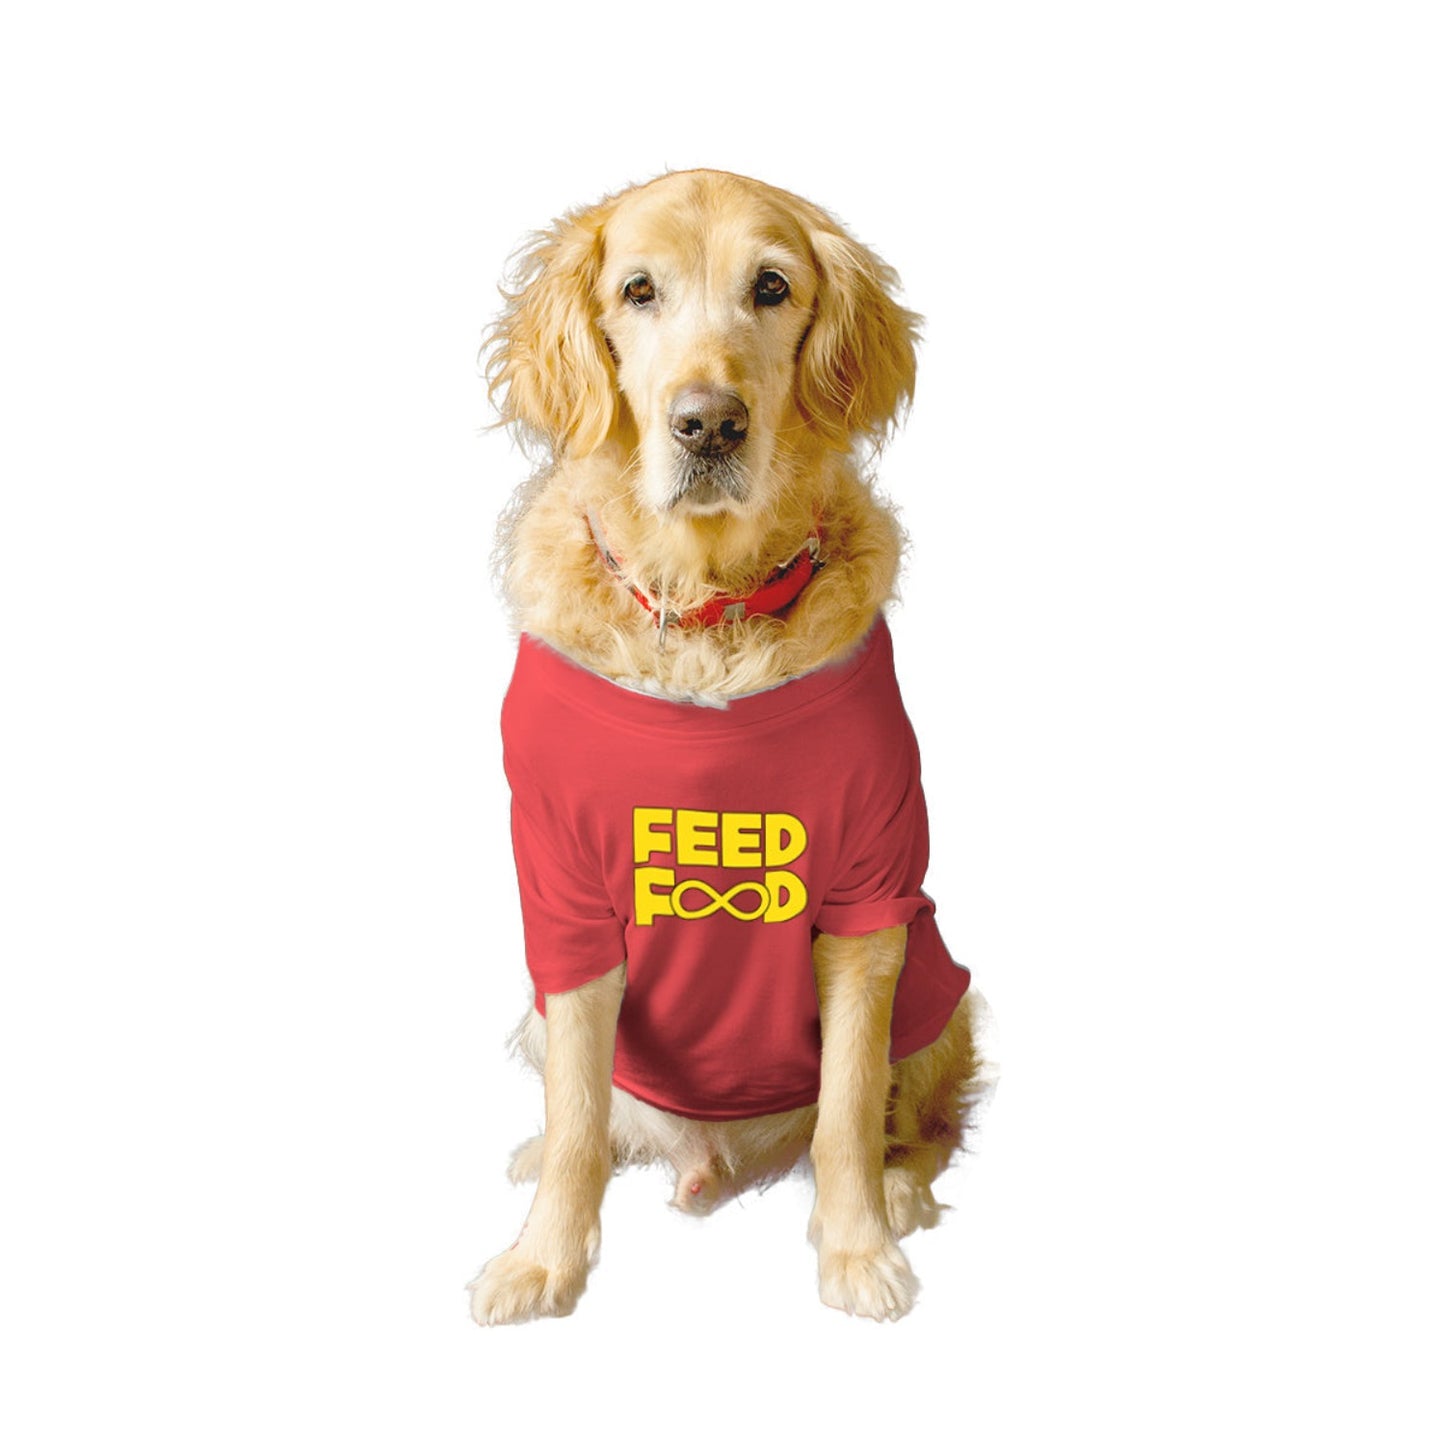 Ruse XX-Small (Chihuahuas, Papillons) / Poppy Red Ruse Basic Crew Neck "Feed Food" Printed Half Sleeves Dog Tee